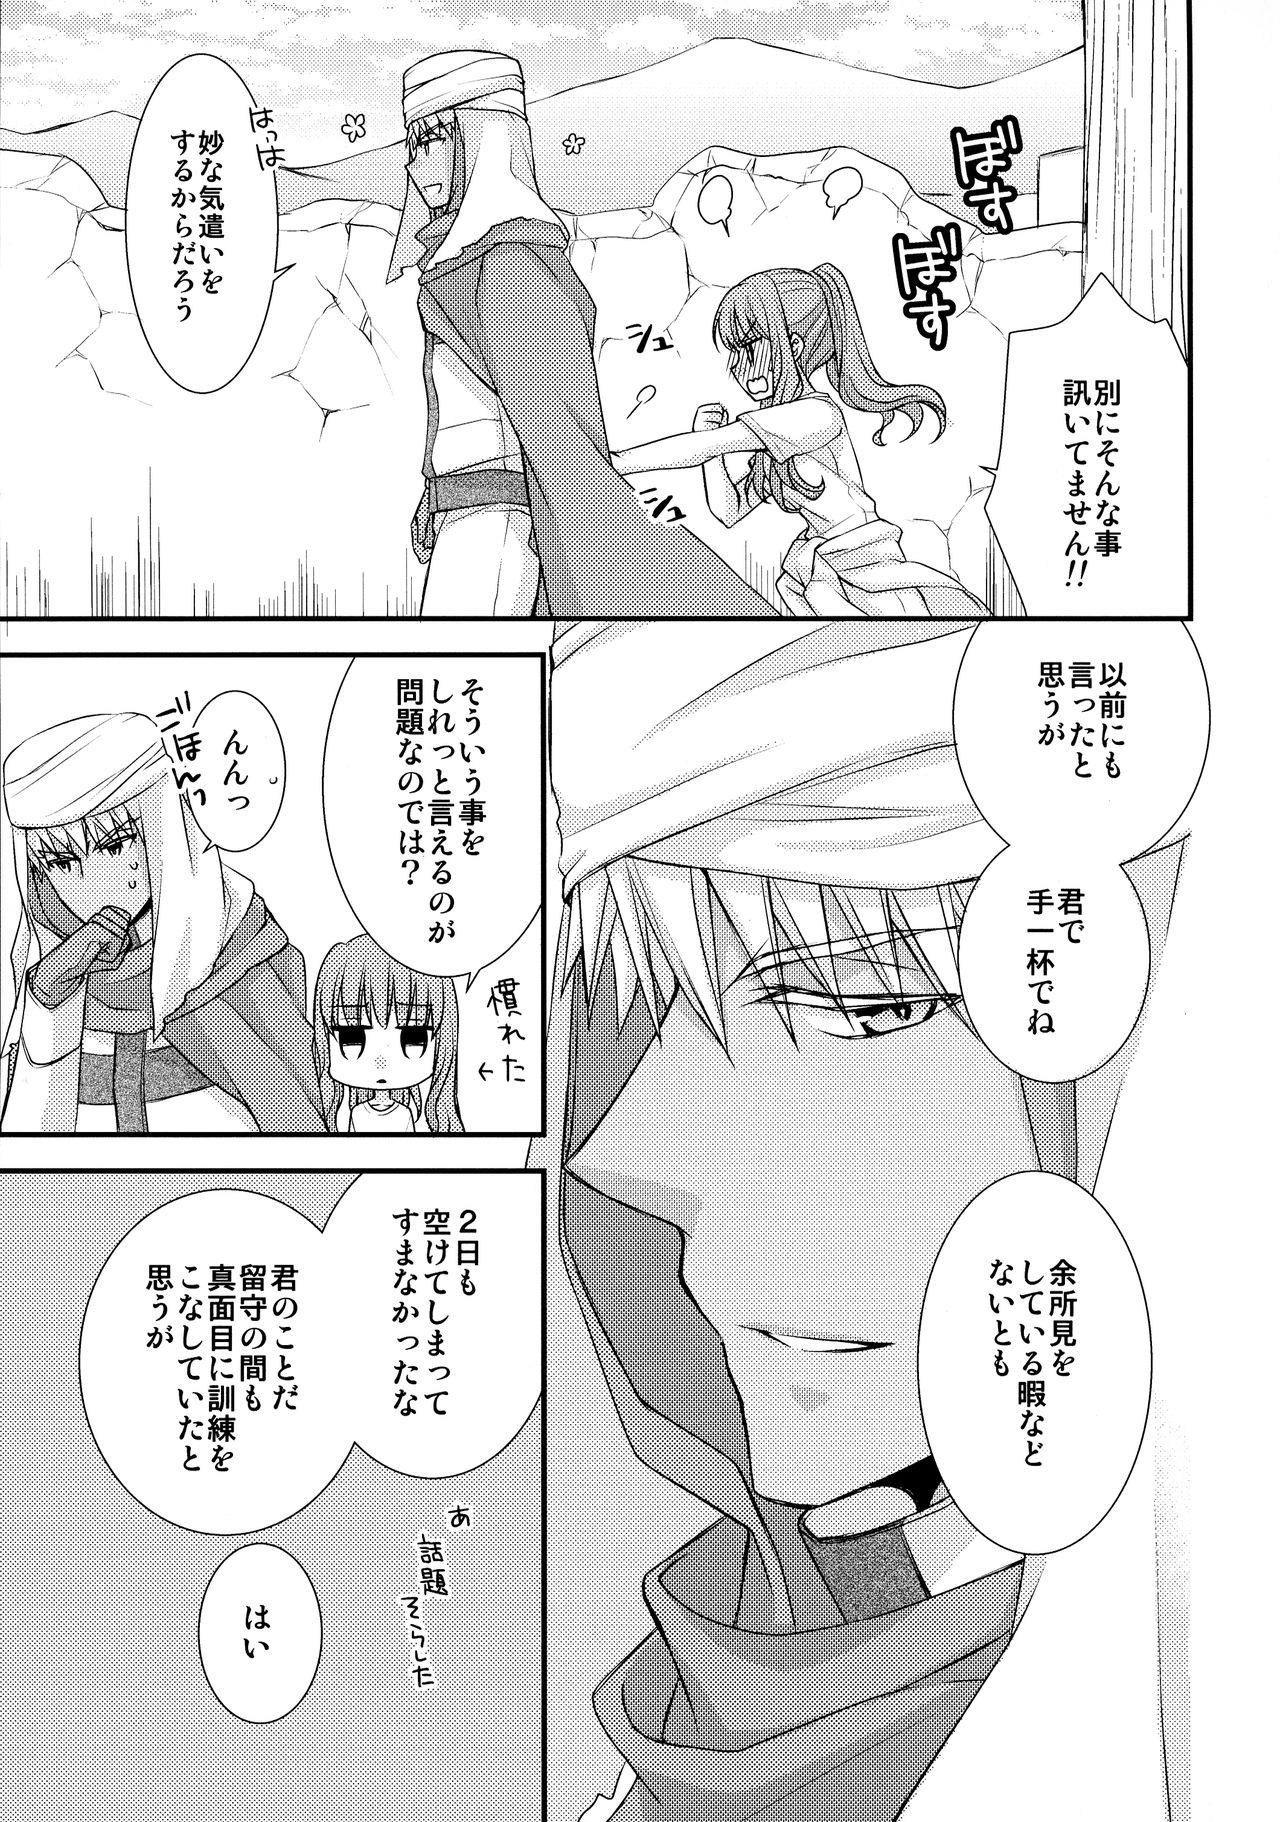 Harcore Sonote o, - Fate extra Mms - Page 7